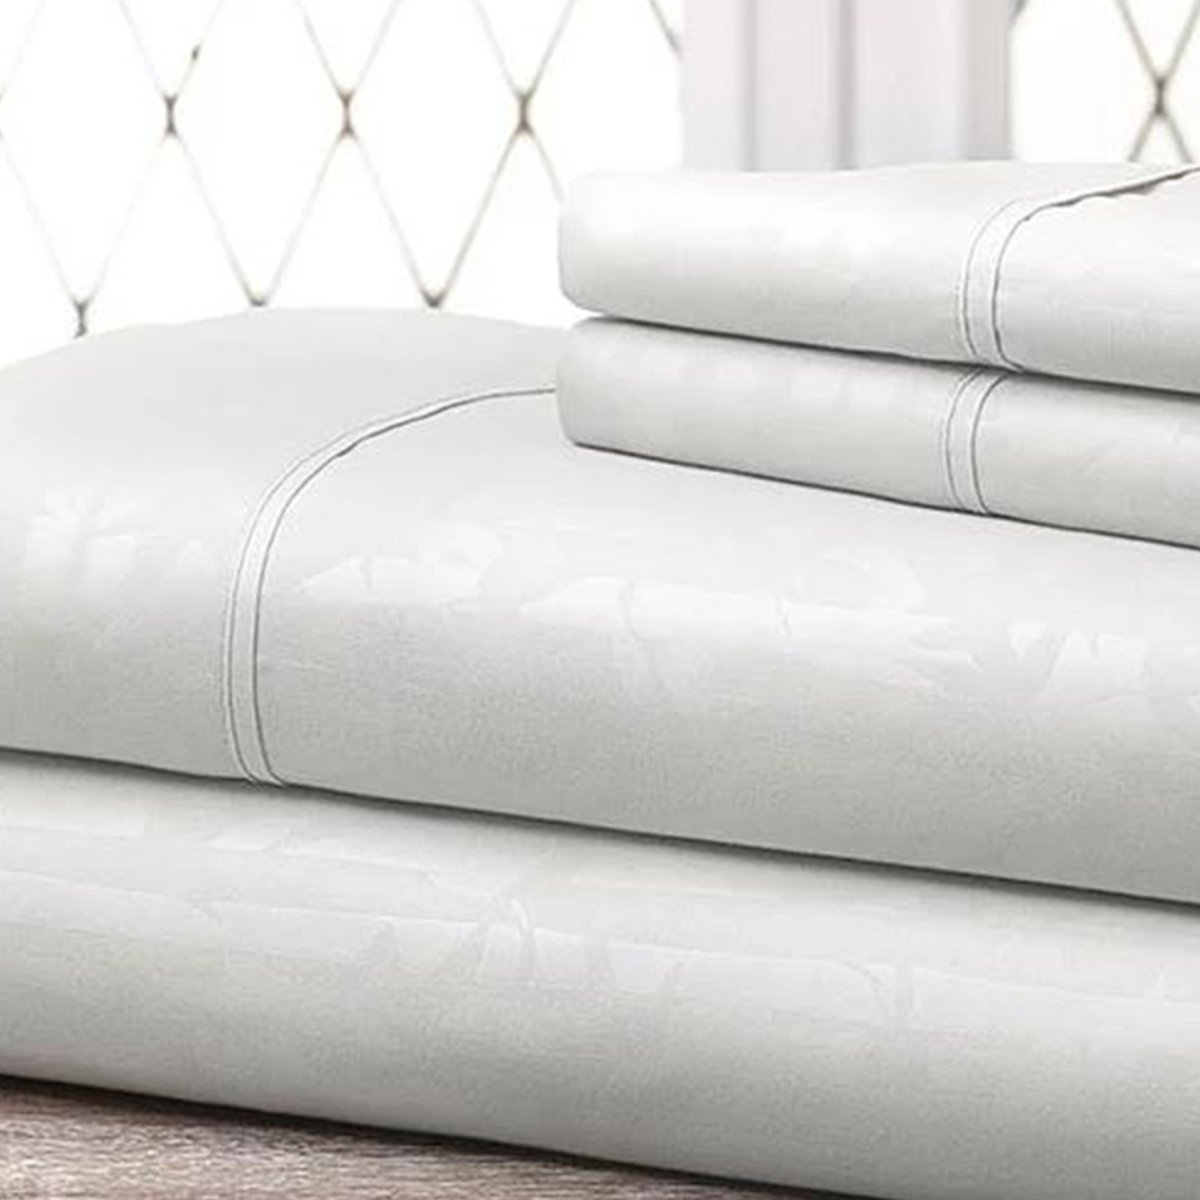 Super-soft 1600 Series Bamboo Embossed Bed Sheet, White - Full, 4 Piece